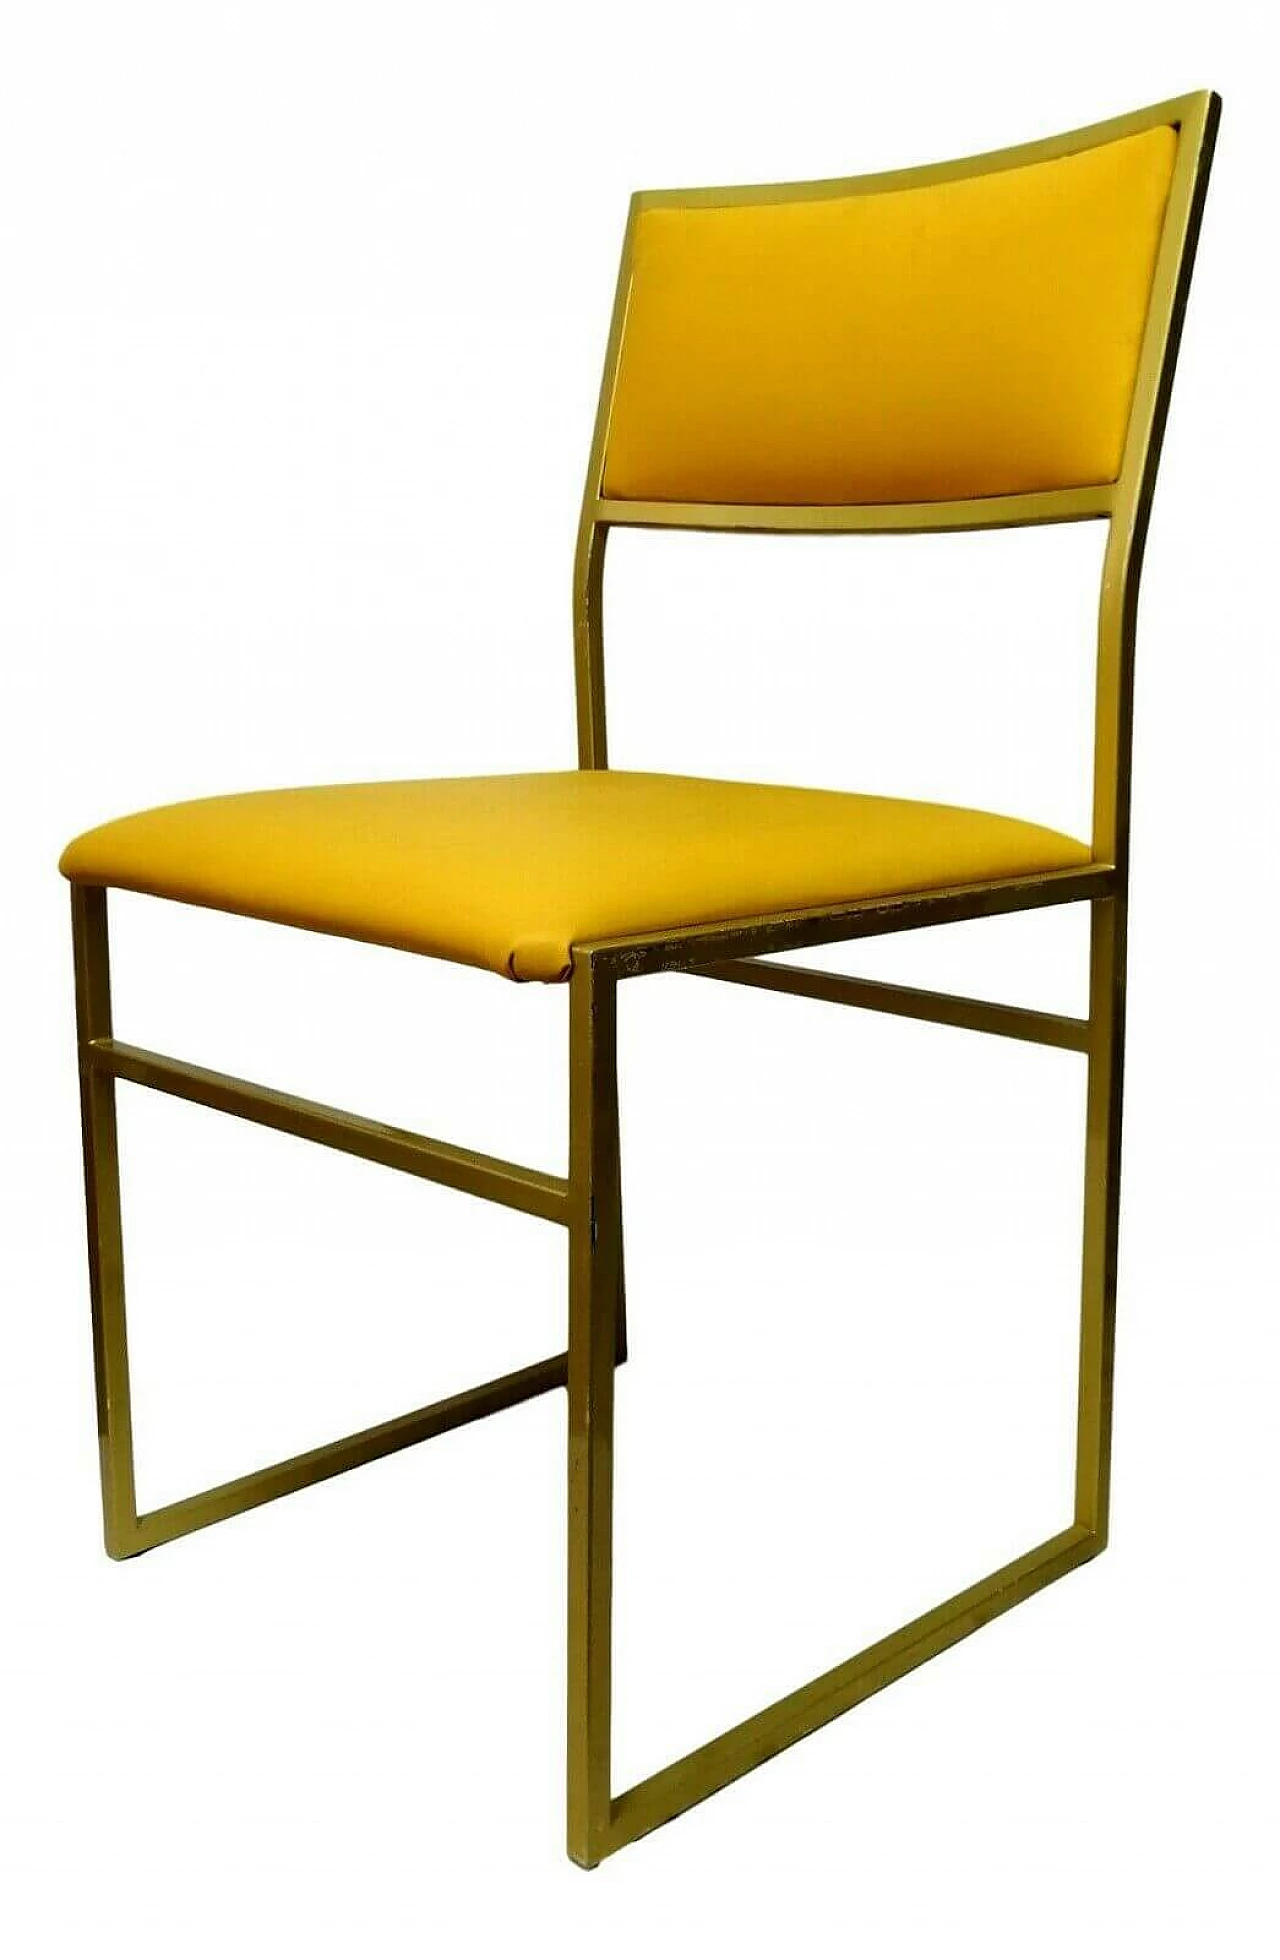 Metal chair and seat yellow, 70s 1166236